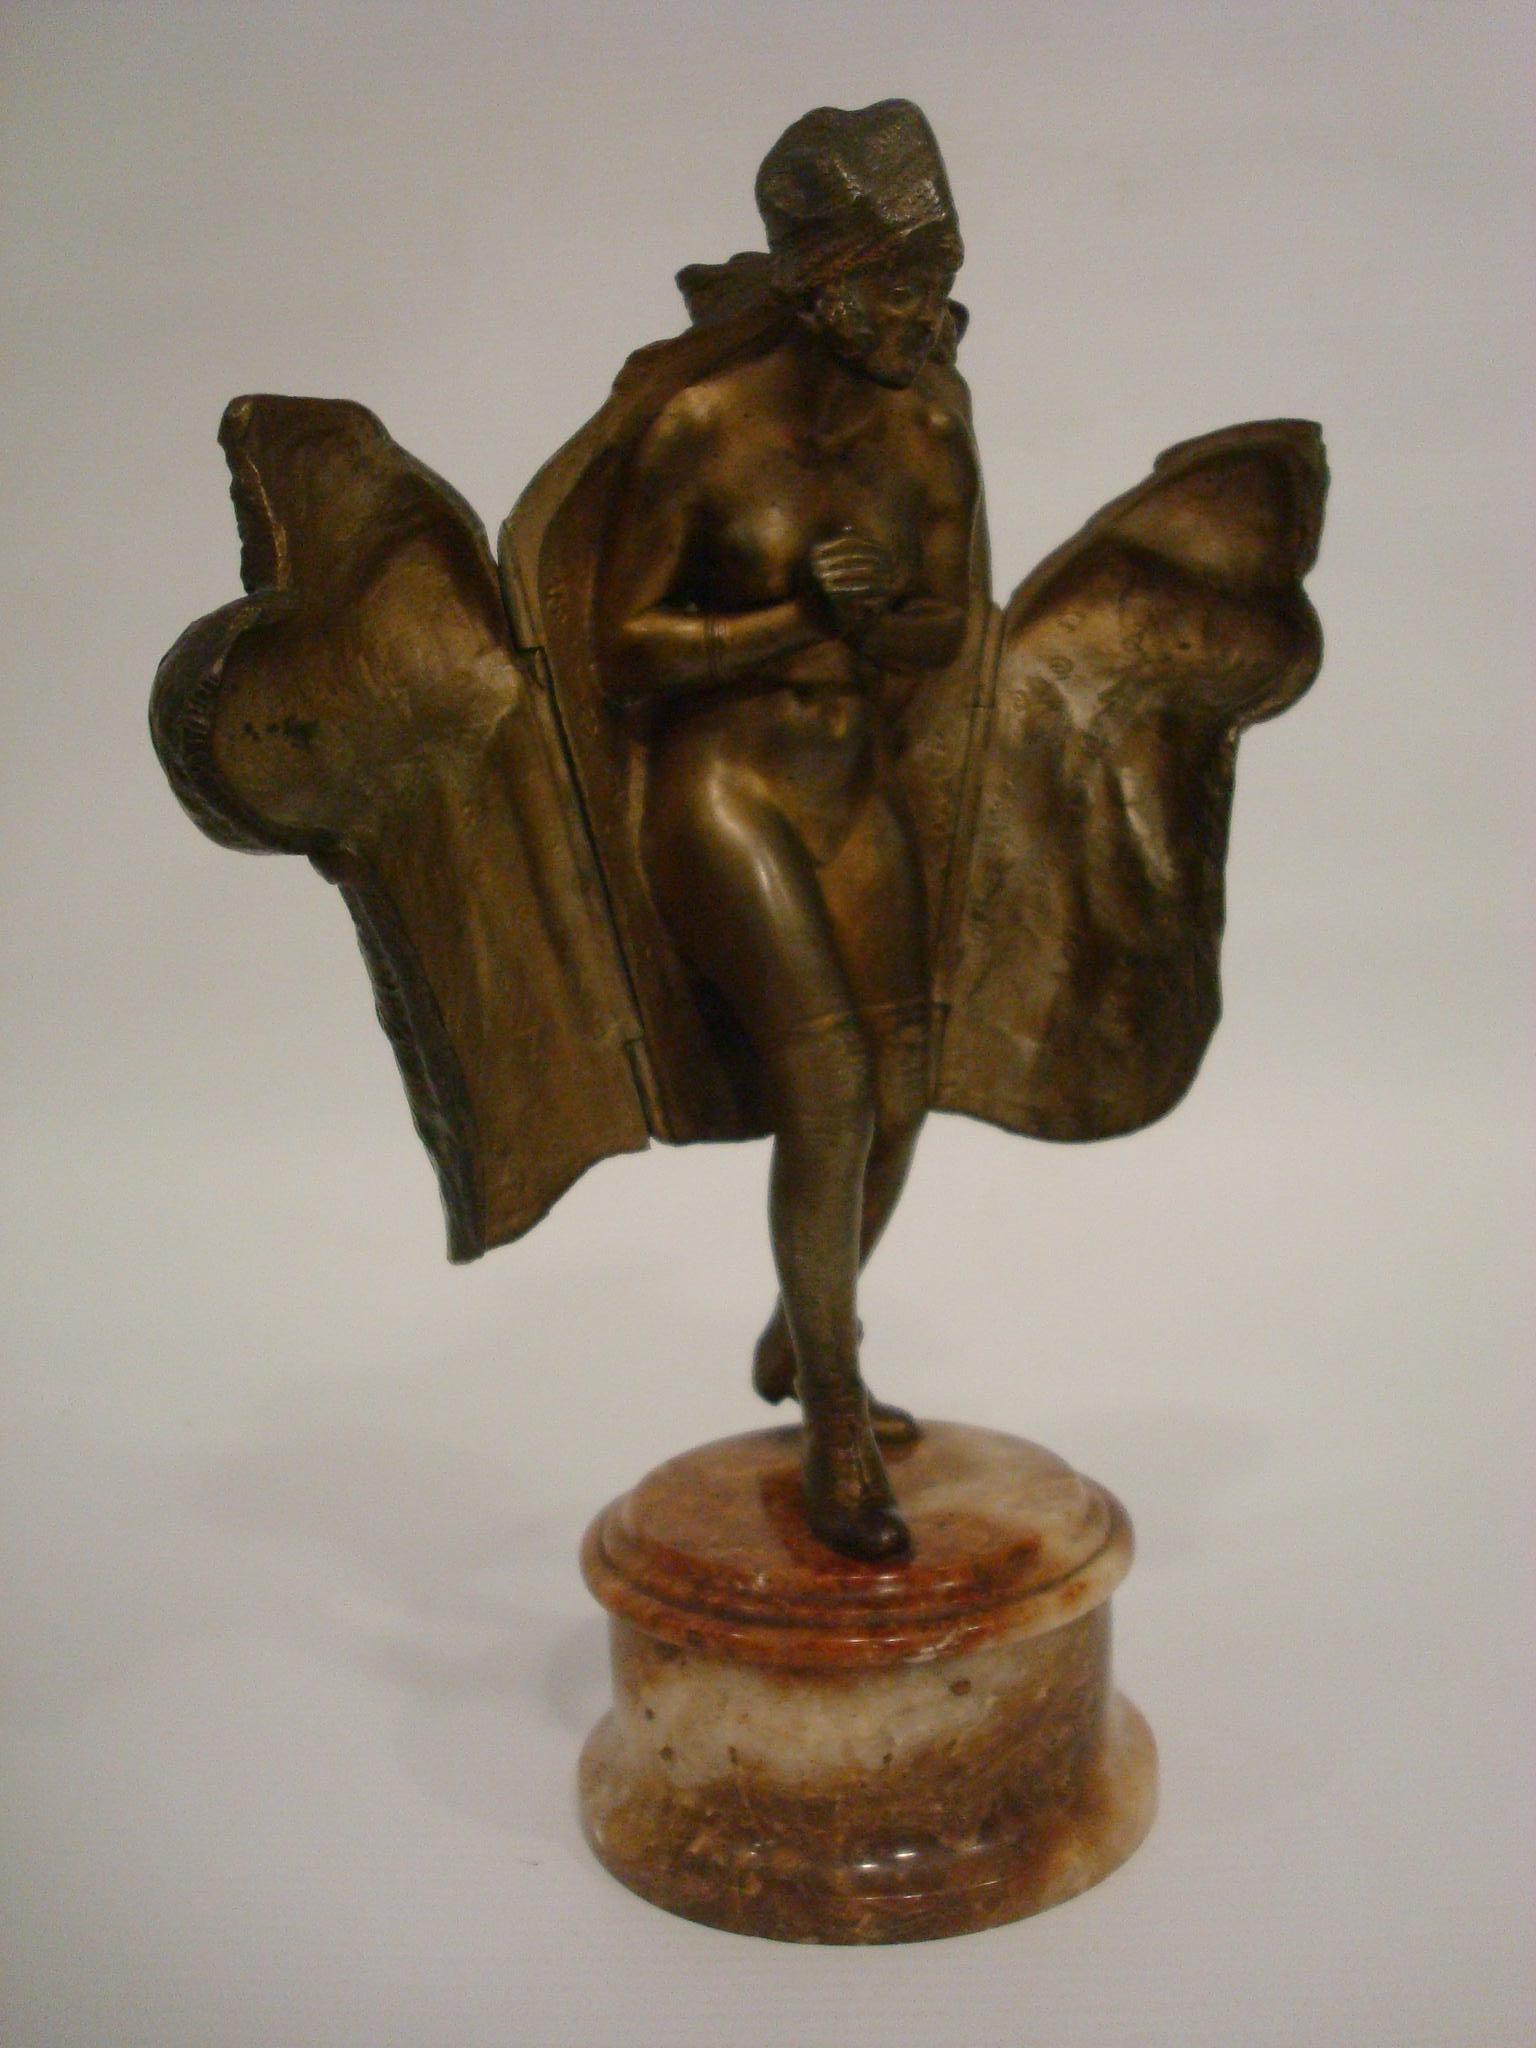 This has always been one of our favorite naughty bronzes. This lovely girl, wearing her finest fur coat, is willing to open it up to reveal her nude body. This bronze is in remarkable condition. We have owned other examples in our 27 years of